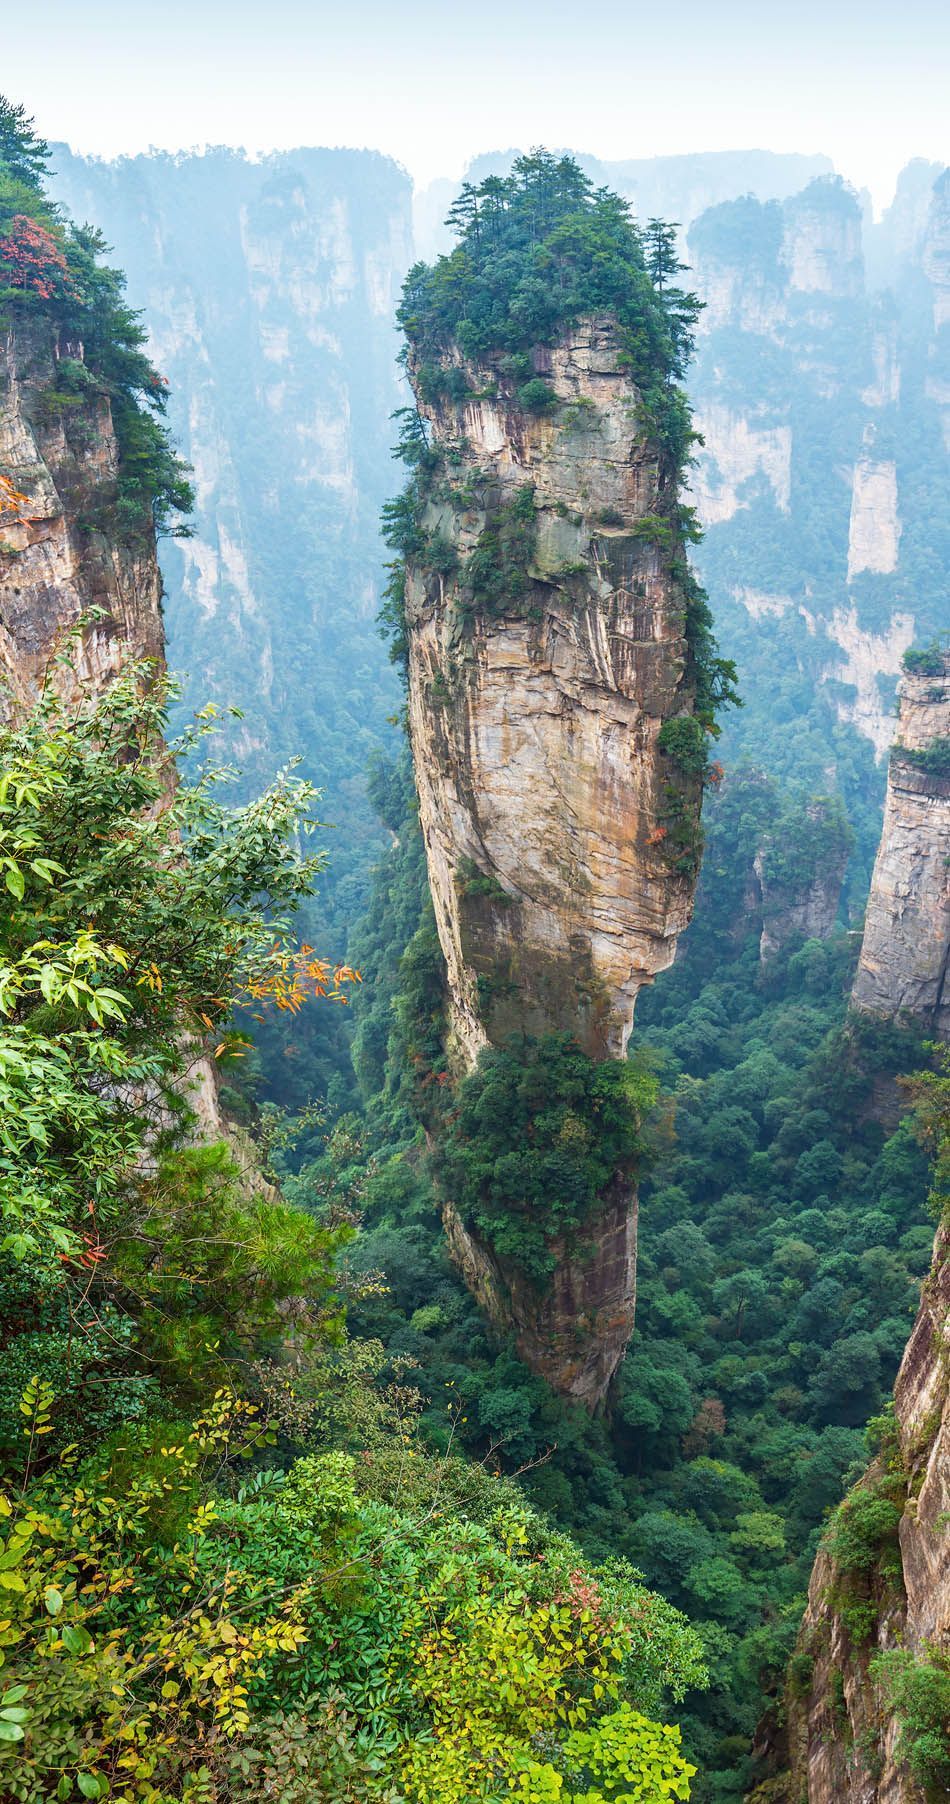 Alone rock column mountain (Avatar rocks). Zhangjiajie National Forest Park was officially recognized as a UNESCO World Heritage